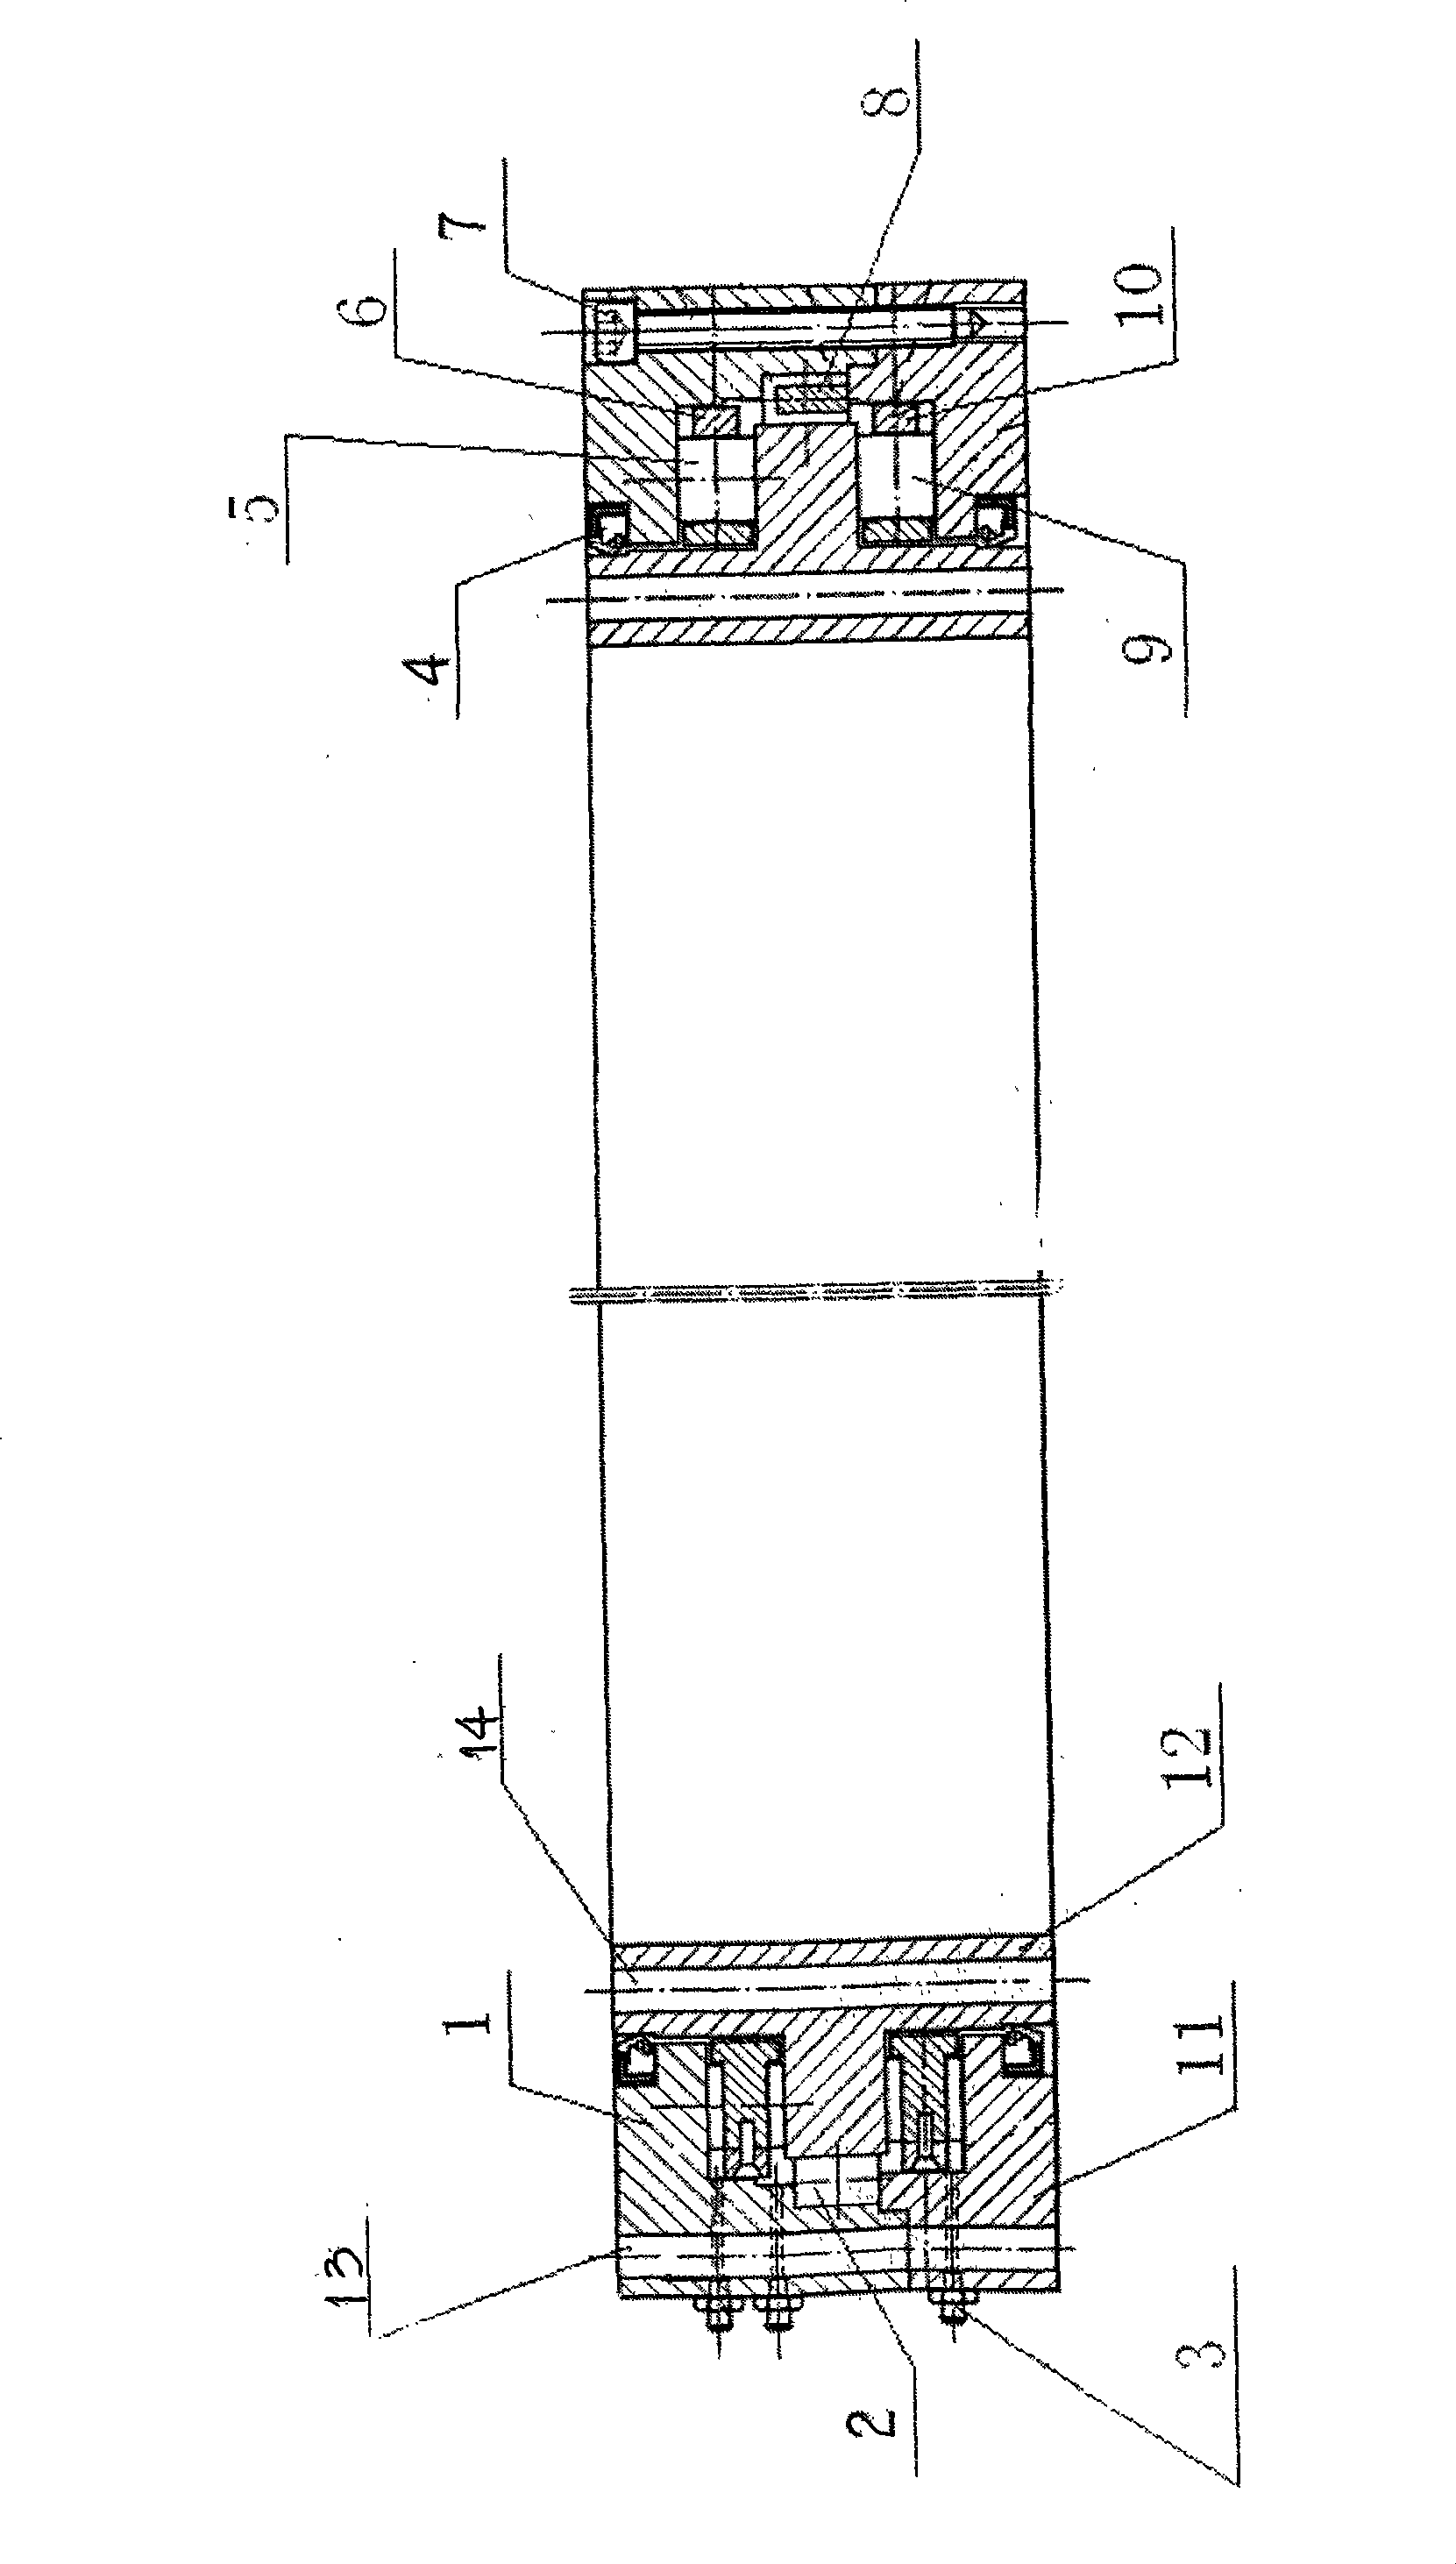 Main bearing for wind power generation